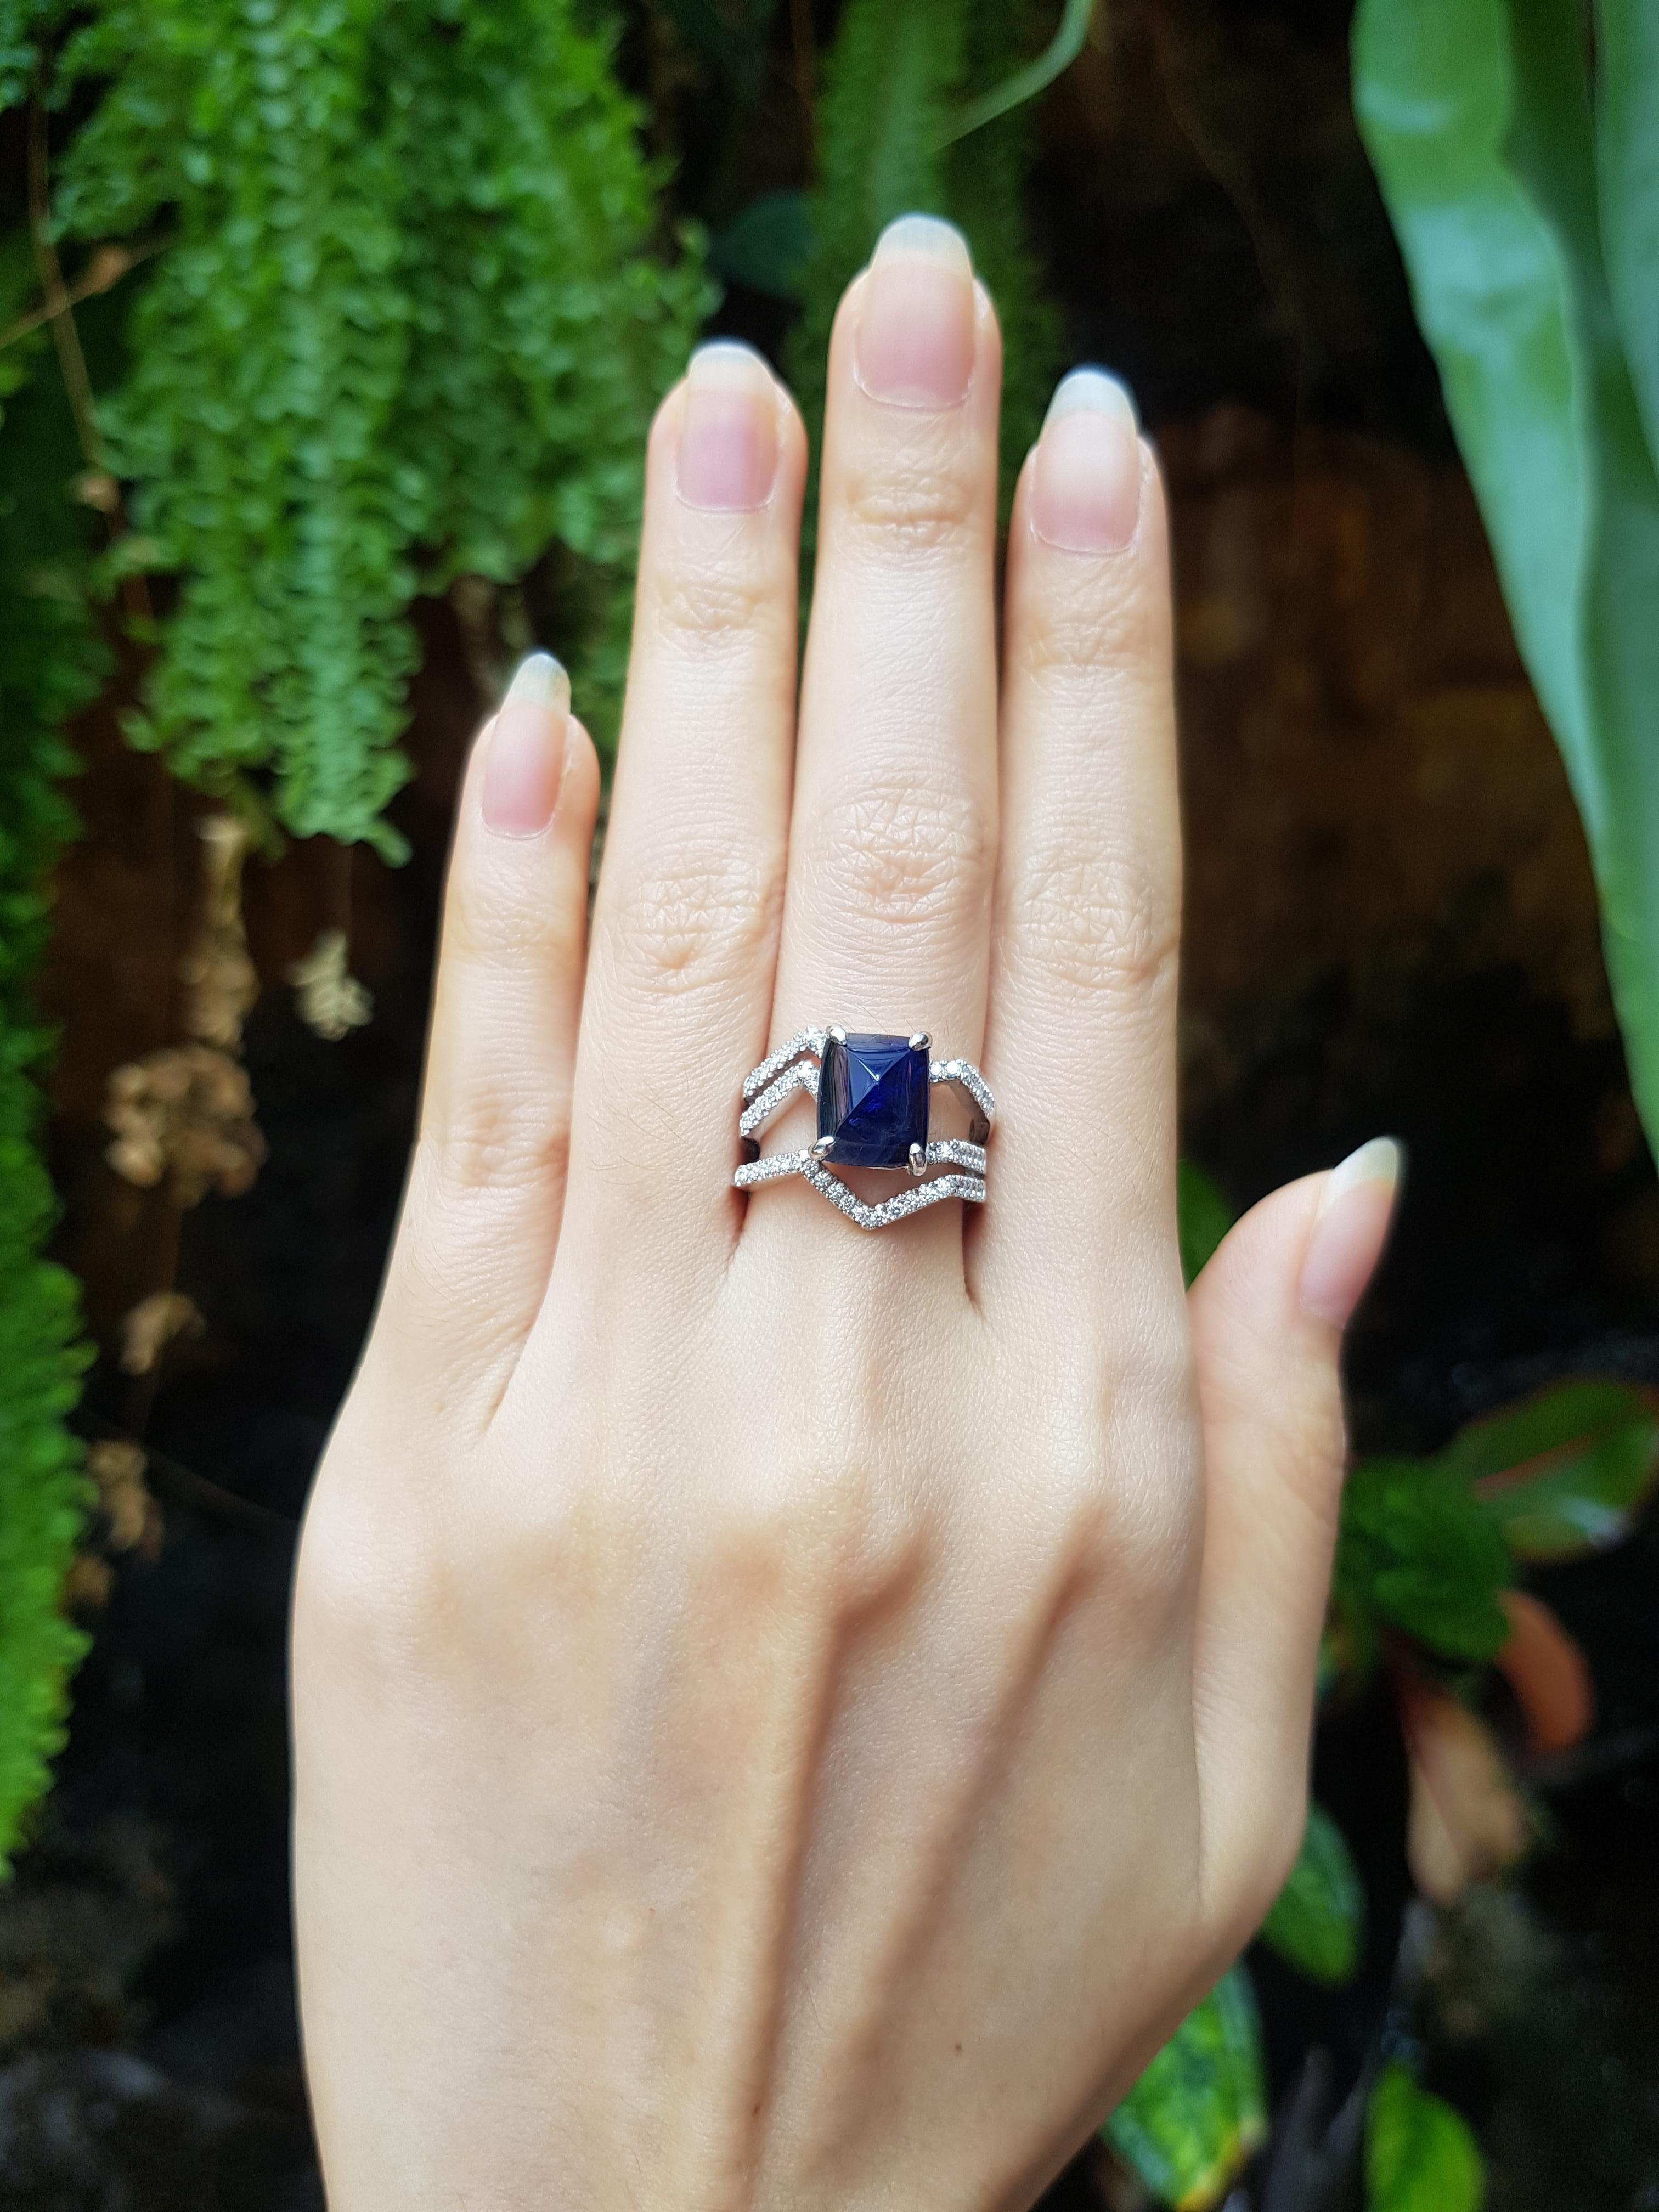 Cabochon Blue Sapphire 4.10 carats with Diamond 0.31 carat Ring set in 18 Karat White Gold Settings
(GIT Certified, The Gem and Jewelry Institute of Thailand)

Width:  1.5 cm 
Length: 2.0 cm
Ring Size: 52
Total Weight: 8.91 grams


The ancient